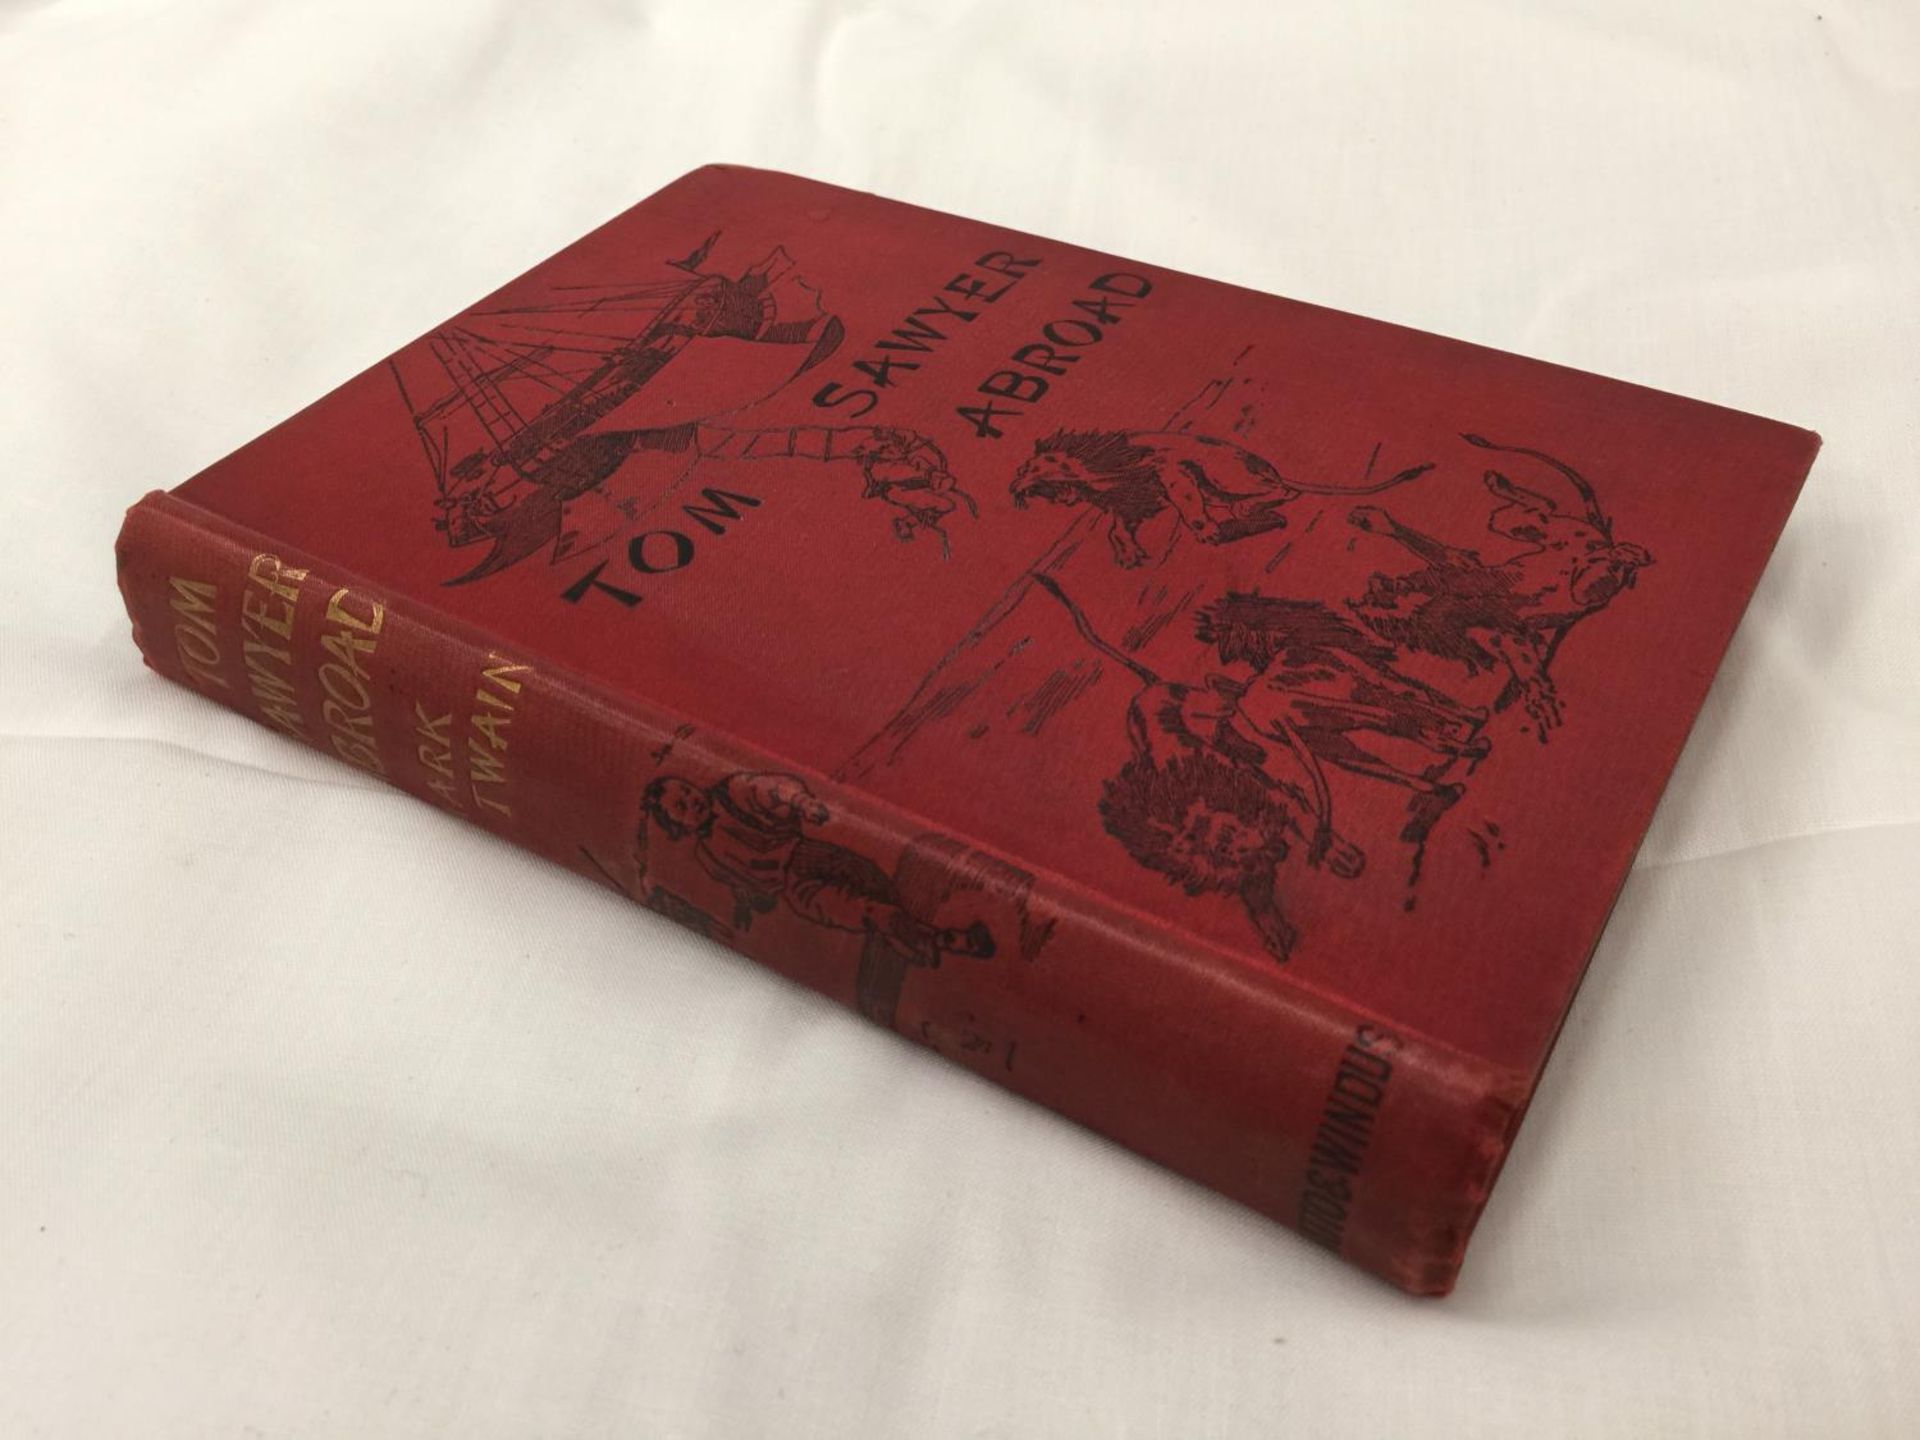 A FIRST EDITION TOM SAWYER ABROAD HARDBACK BY MARK TWAIN - PUBLISHED 1894 BY CHATTO & WINDUS - Image 2 of 7